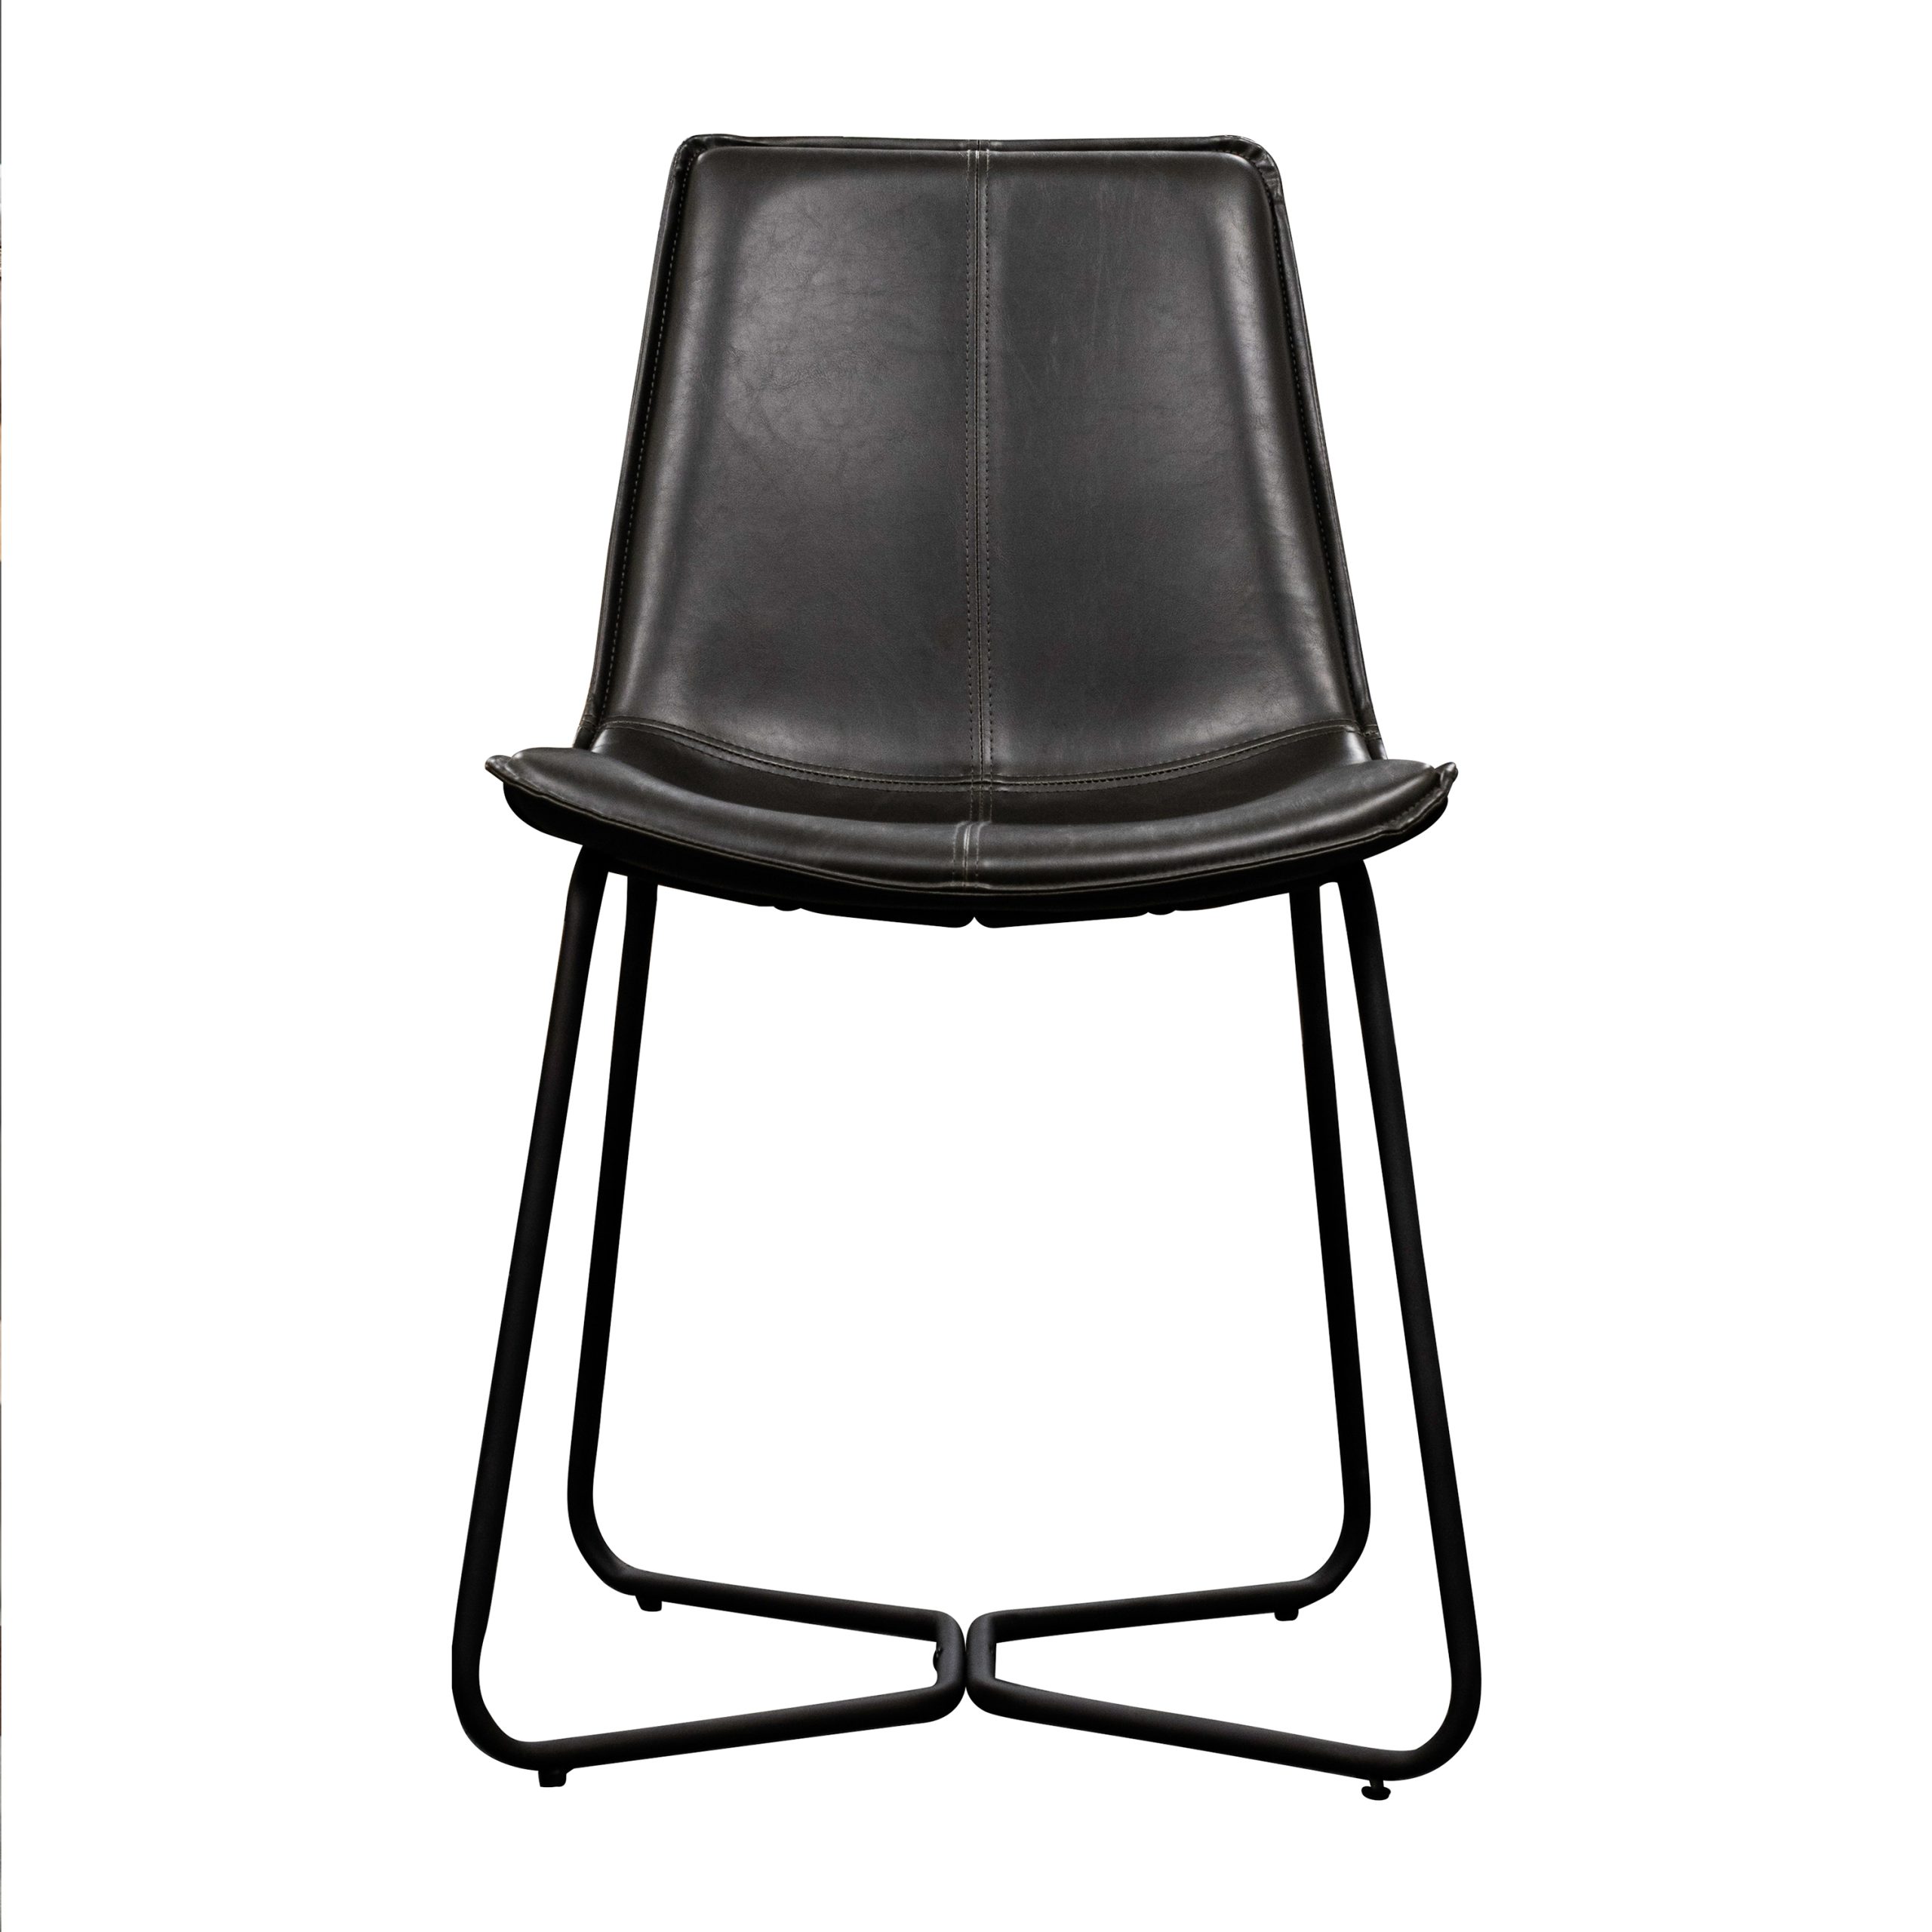 Gallery Direct Hawking Chair Charcoal (Set of 2)